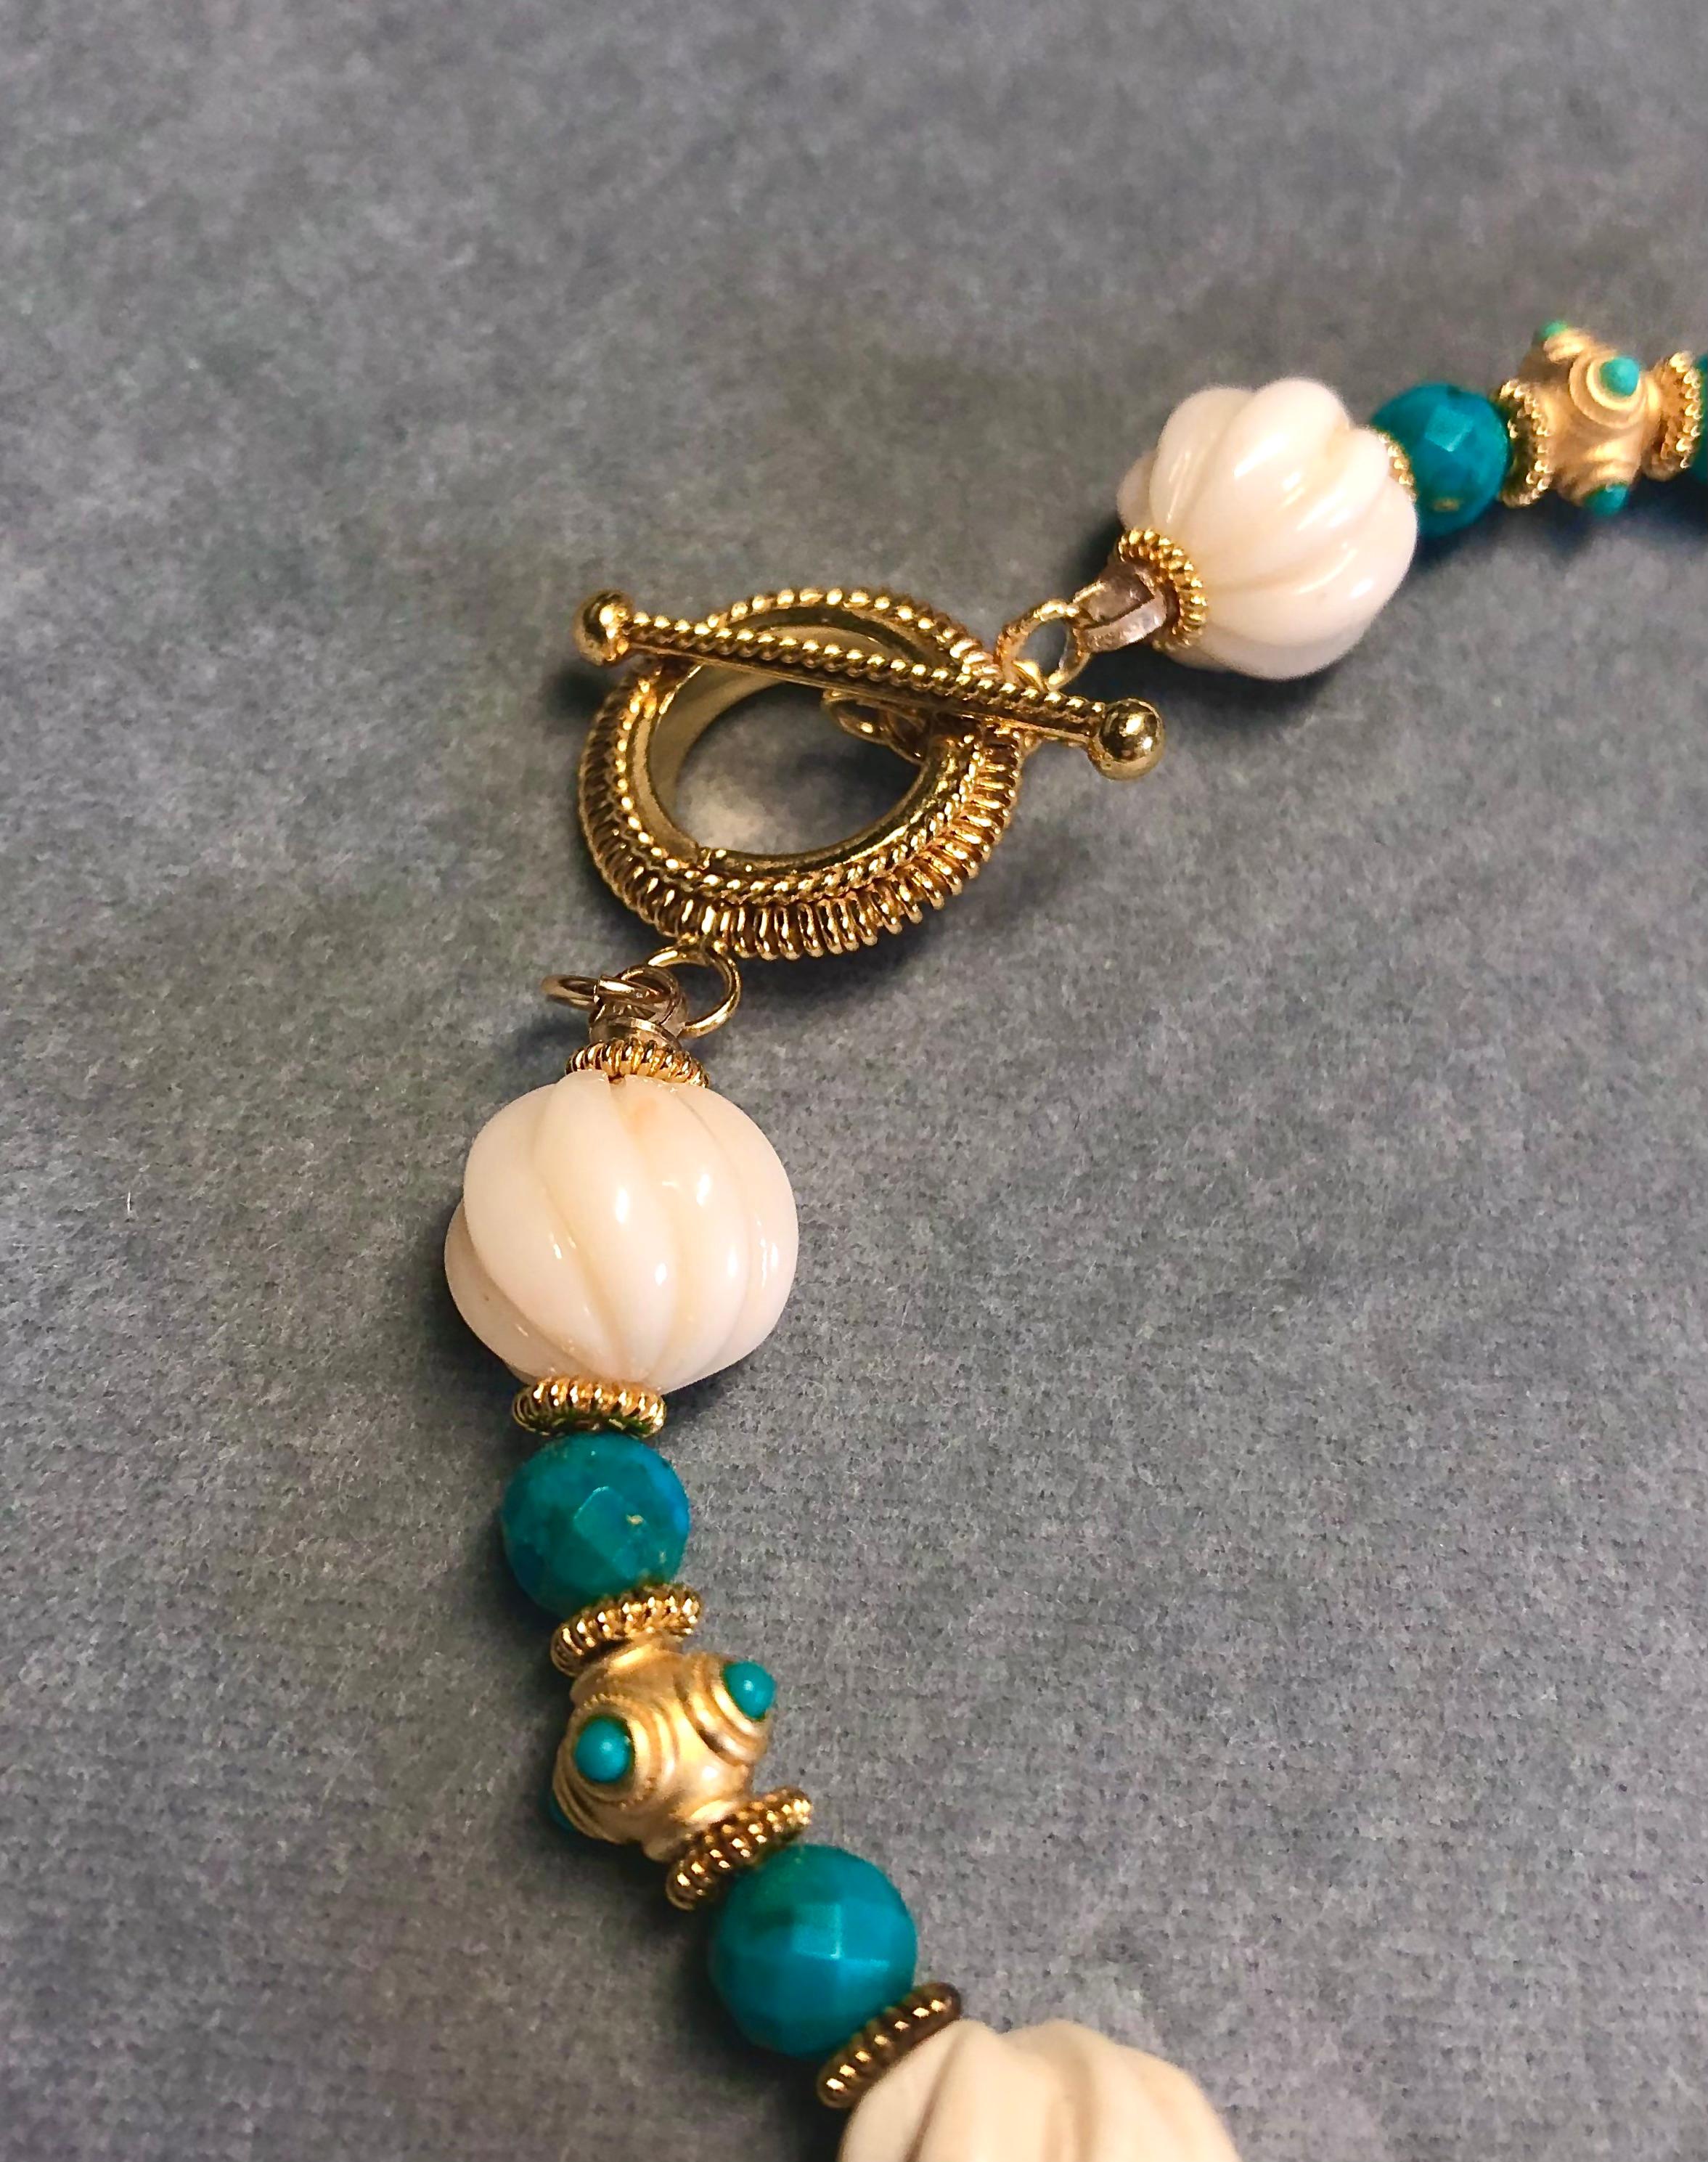 19th Century Mughal style necklace w/ vintage bone bead, gold vermeil, turquoise In New Condition For Sale In New Orleans, LA